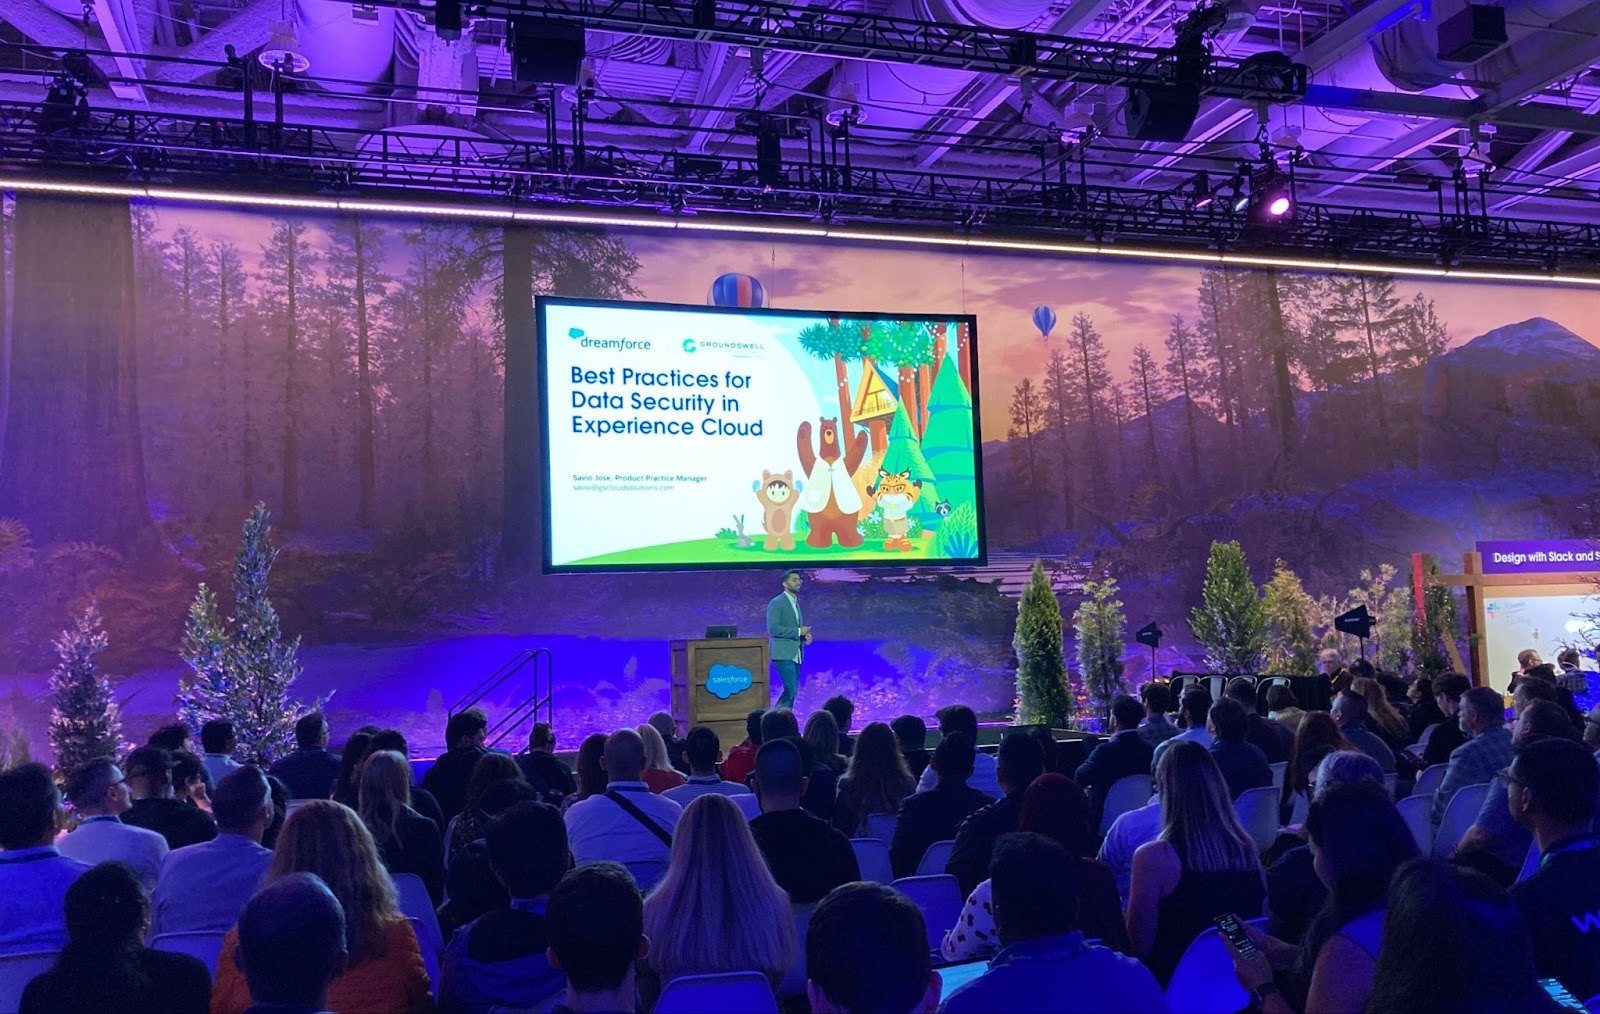 Savio Jose's outstanding presentation on Best Practices for Data Security in Salesforce Experience Cloud at Dreamforce 2022 